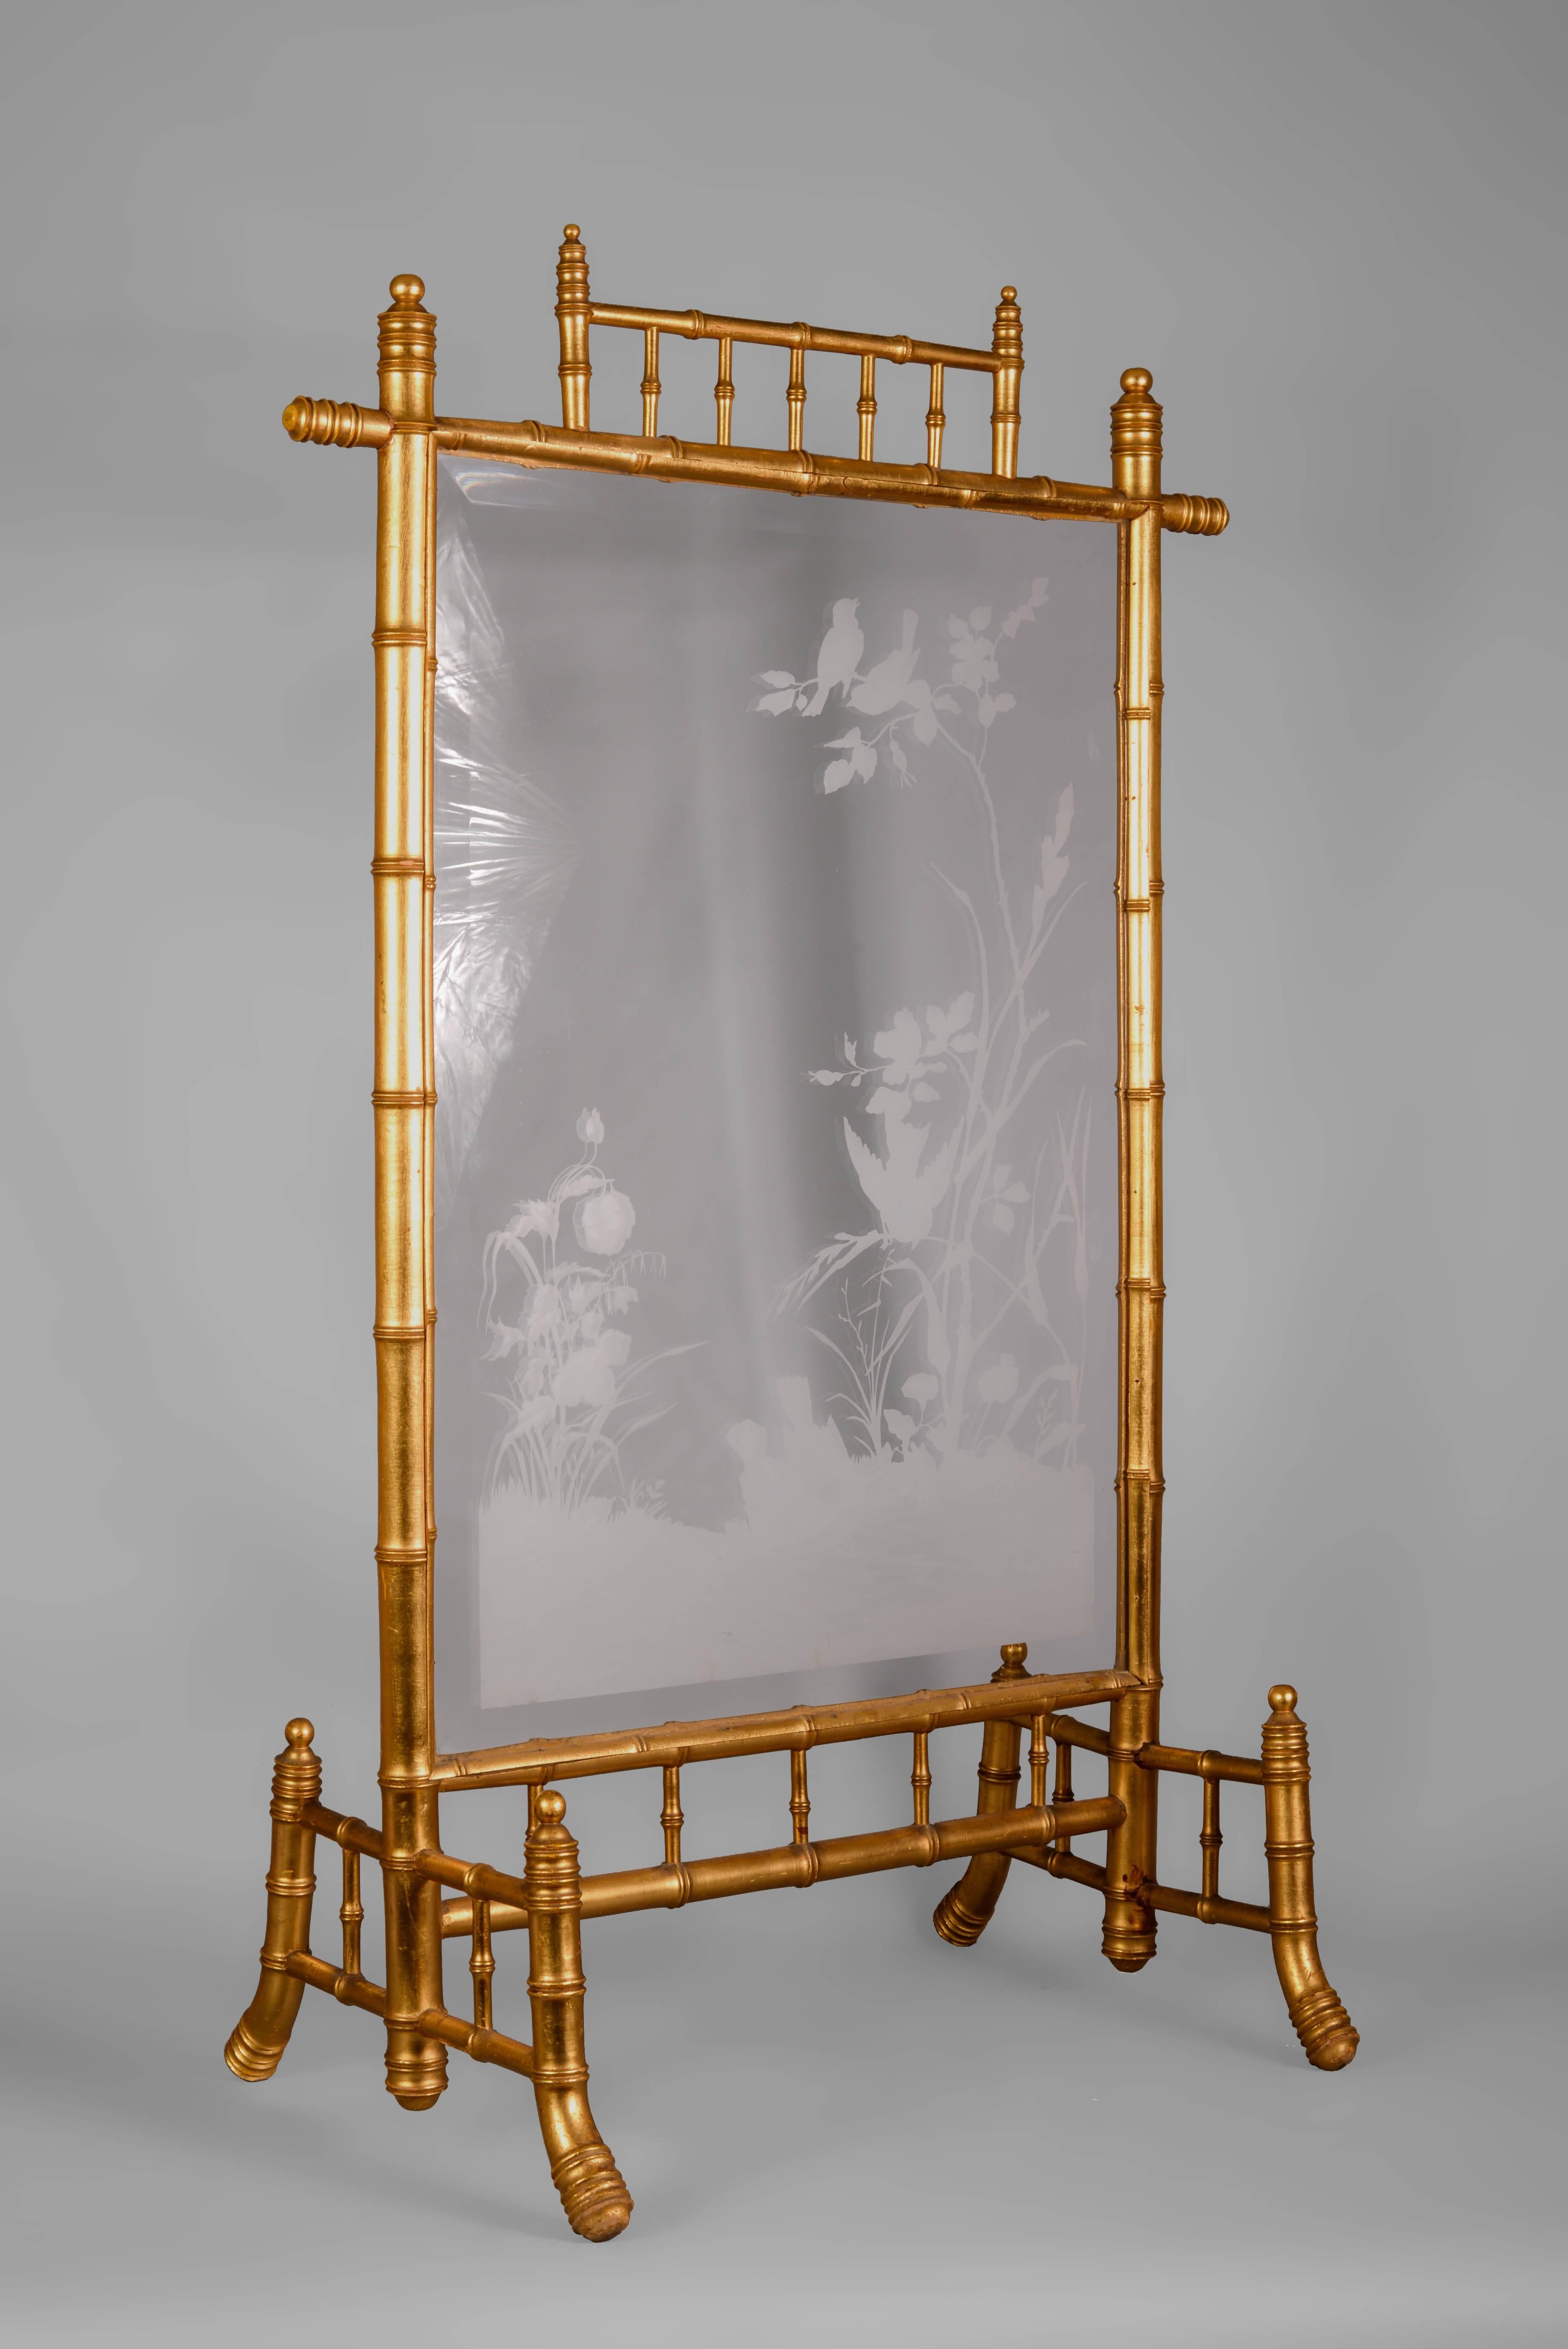 This rare firescreen is a beautiful example of Japonism during the 19th century. The gilt bronze is here shaped in bamboos.
Engraved glass is also a delicate art: The diaphanous decoration represents birds fluttering in thin branches.
The